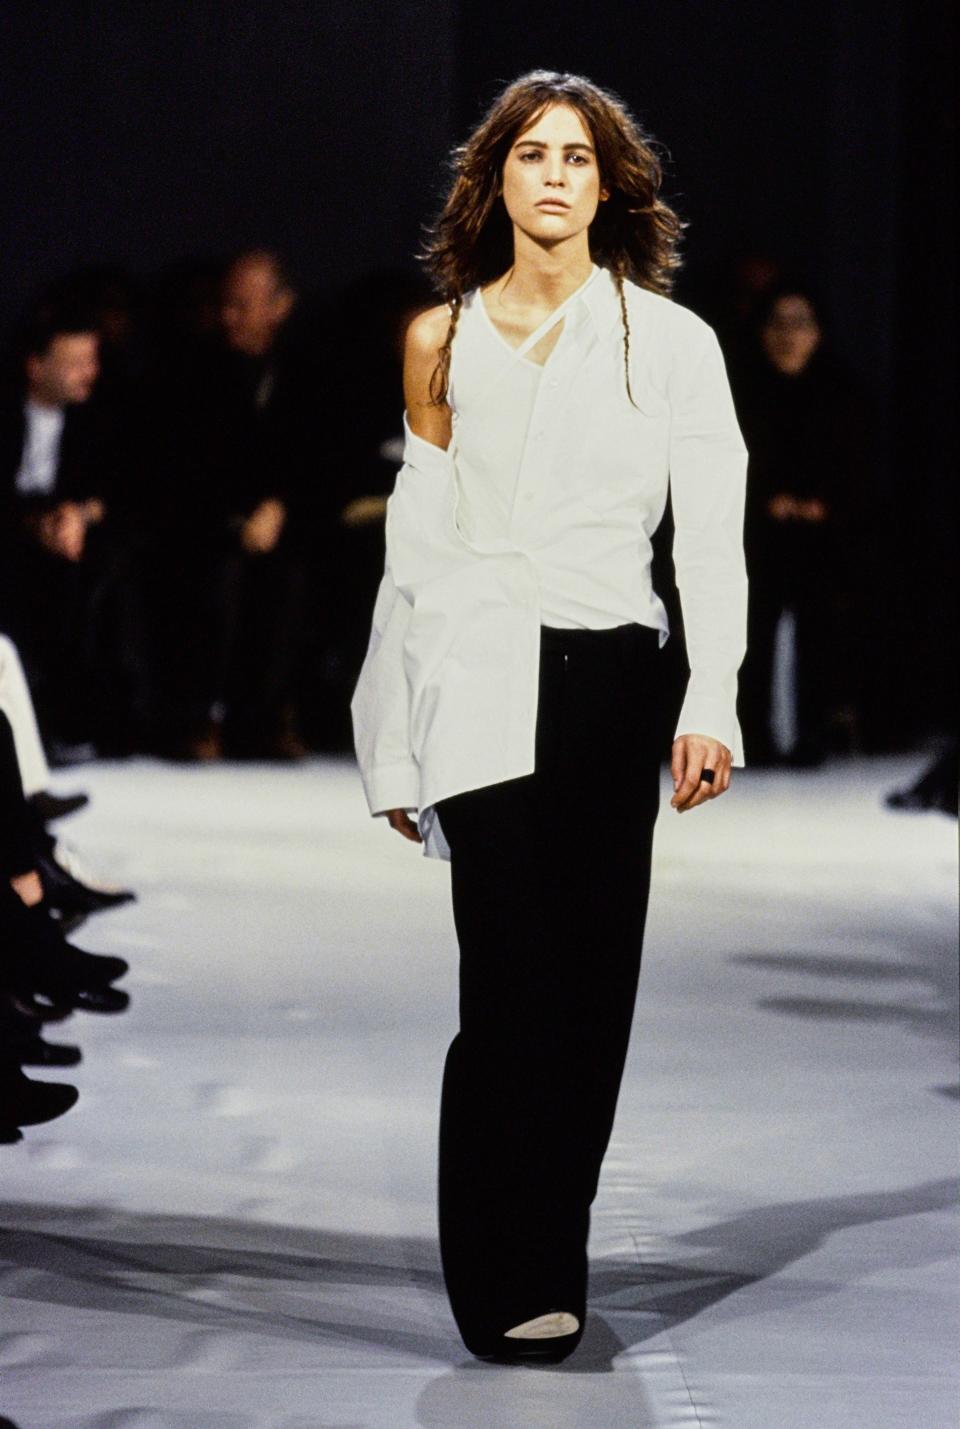 Plus Maison Martin Margiela from 1992 and Helmut Lang circa 1998.